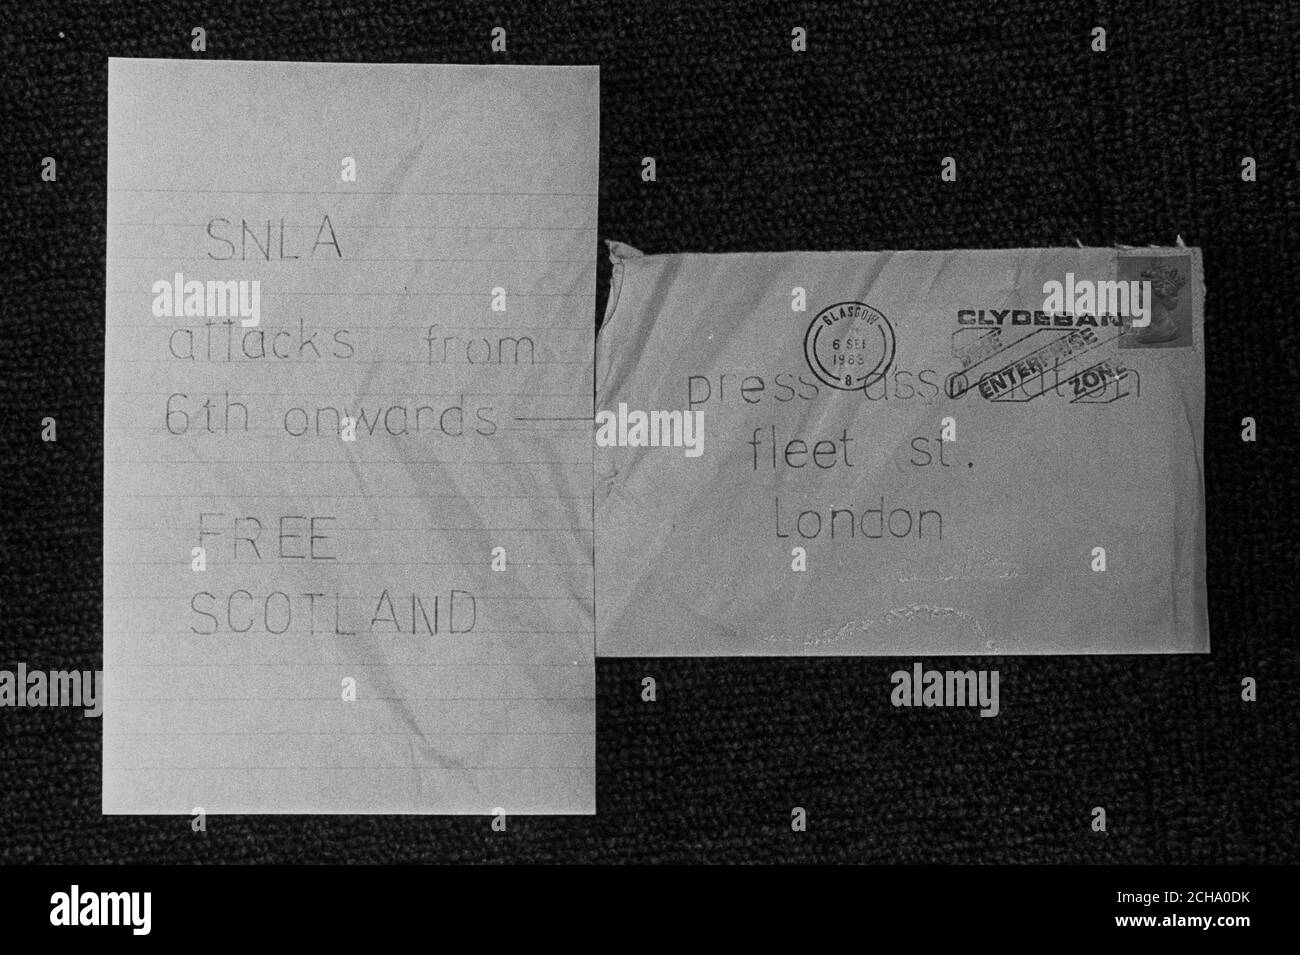 A letter and its envelope sent from the Scottish National Liberation Army to the London offices of the Press Association, the day after two letter bombs were found in London. The letter, bearing a second class stamp, was posted in Glasgow (Sept 6th) and warned of 'SNLA attacks from the 6th onwards - Free Scotland'. Stock Photo